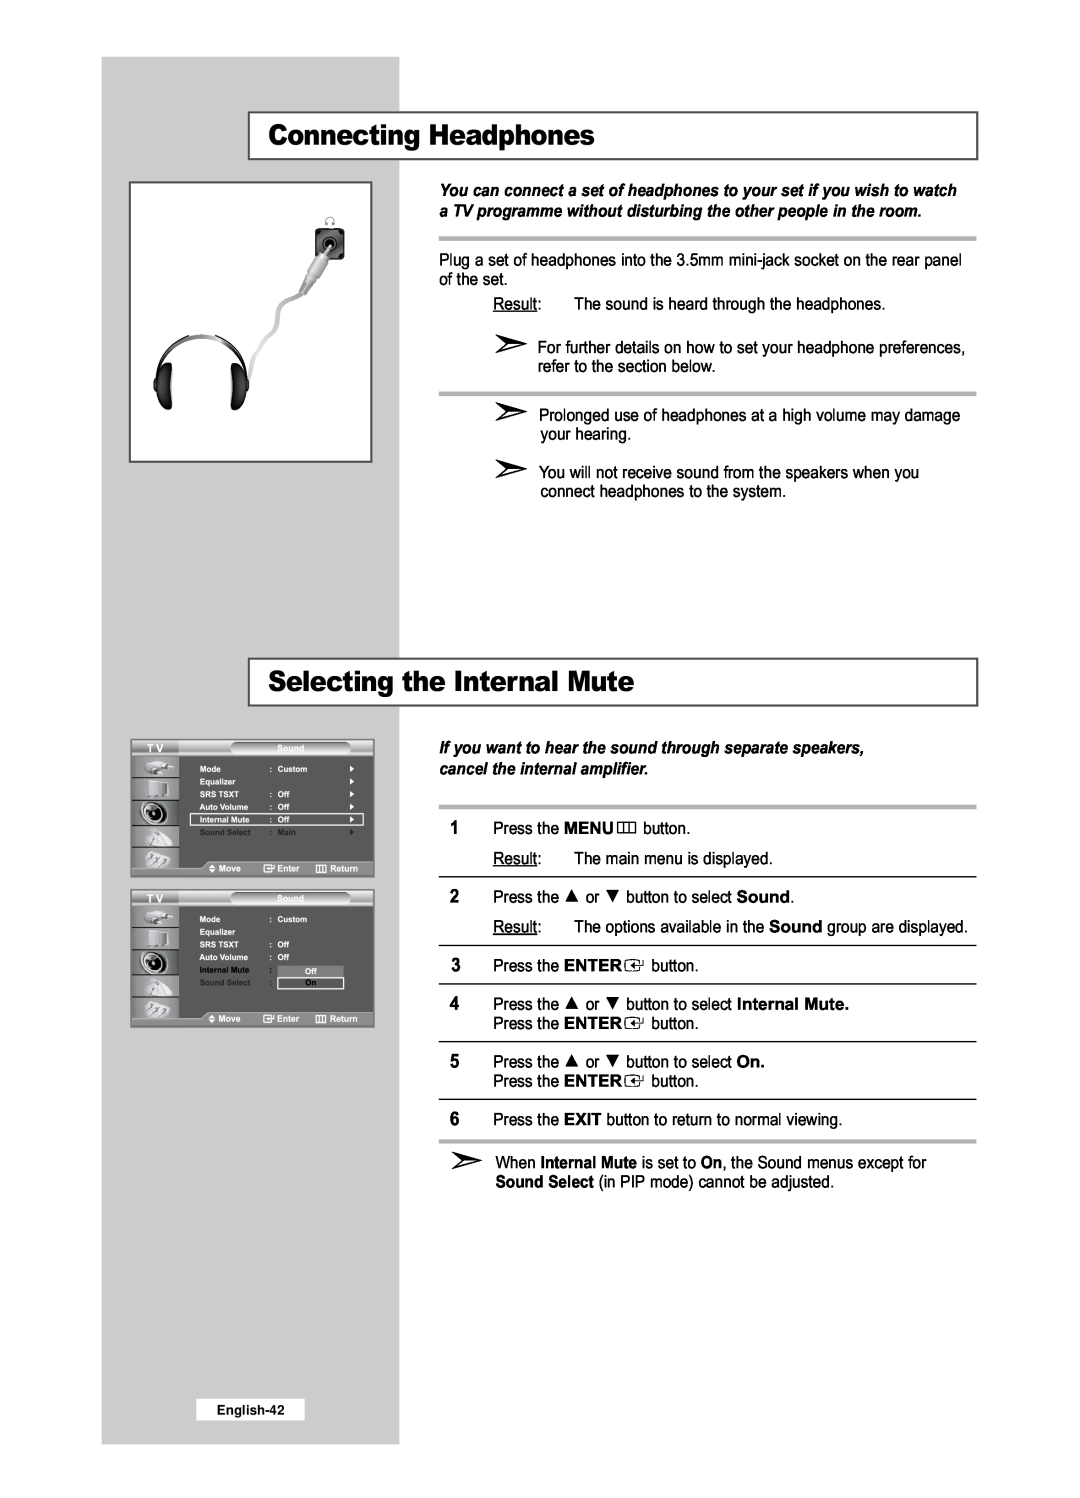 Samsung LE32R53BD, LE26R53BD manual Connecting Headphones, Selecting the Internal Mute, English-42 